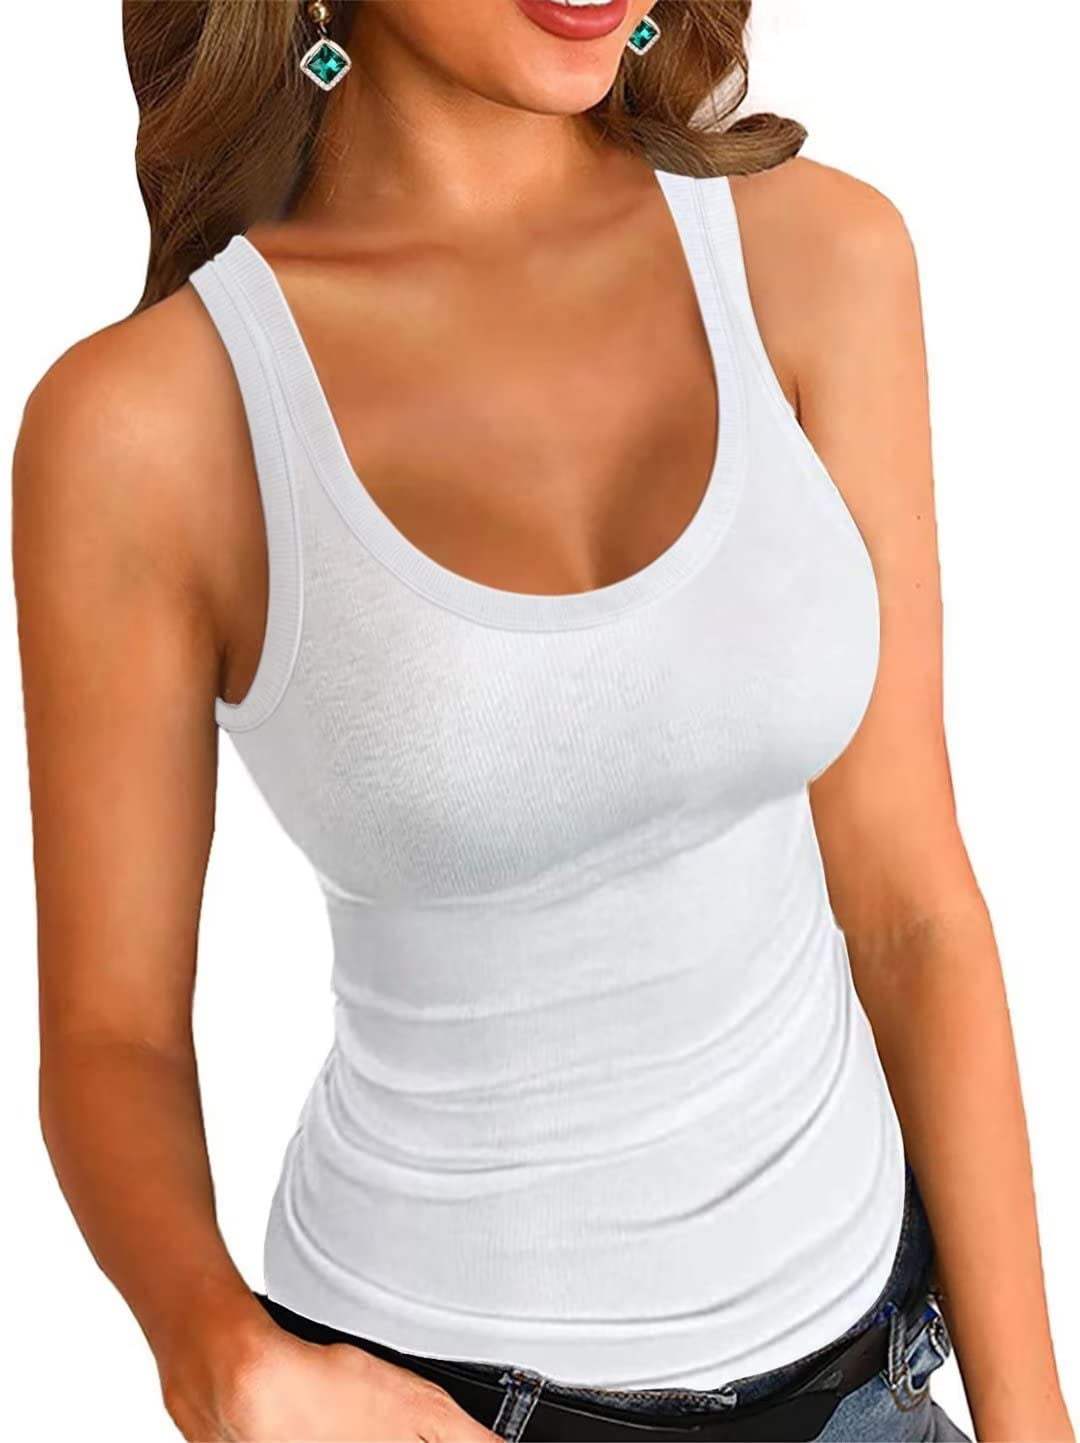 Vafful Women's Sleeveless Tank Top Fitting Scoop Neck Ribbed Knit Basic  Cami Shirts for Women White S-XL